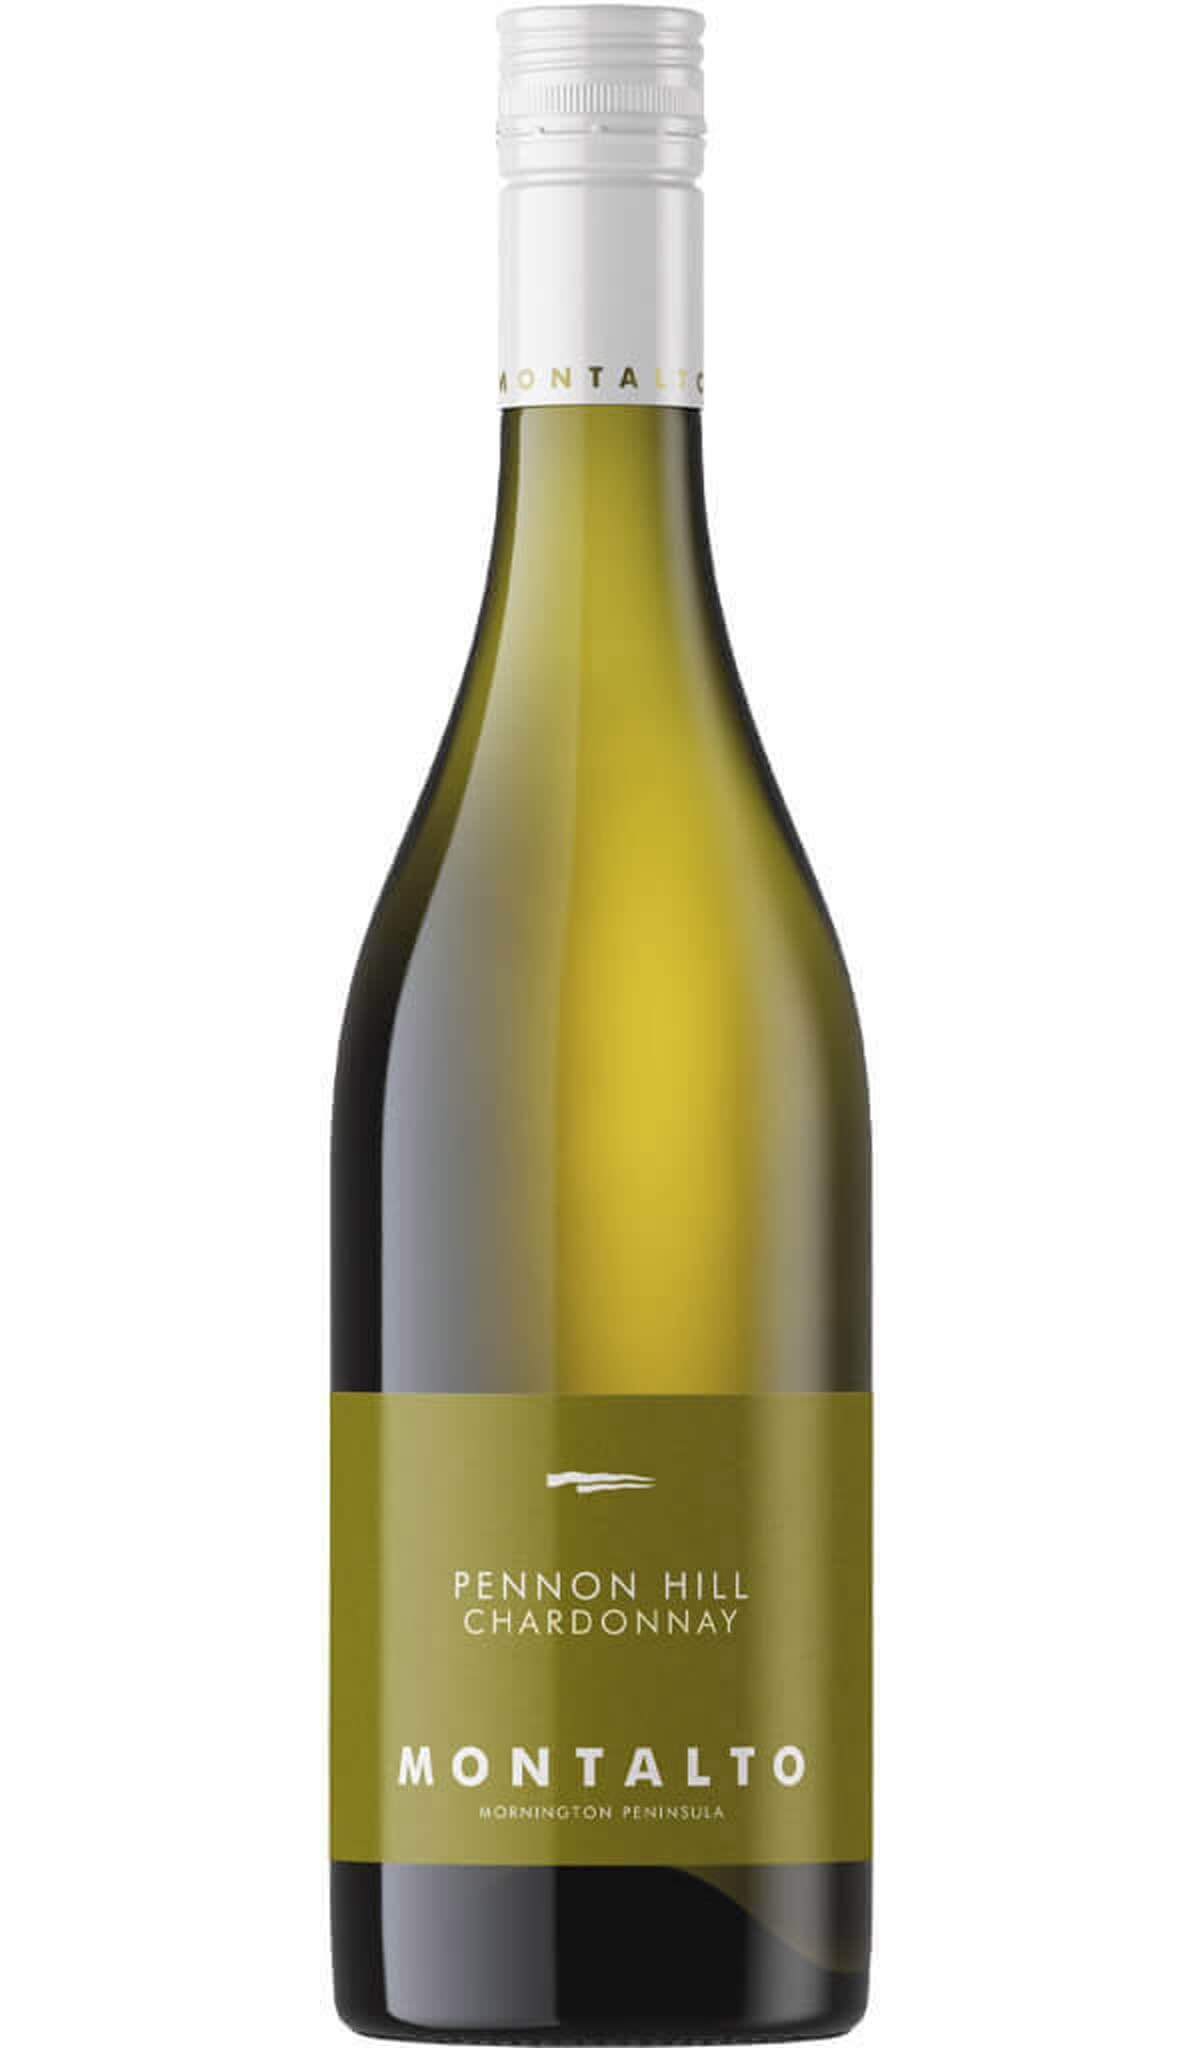 Find out more or buy Montalto Pennon Hill Chardonnay 2022 (Mornington) online at Wine Sellers Direct - Australia’s independent liquor specialists.